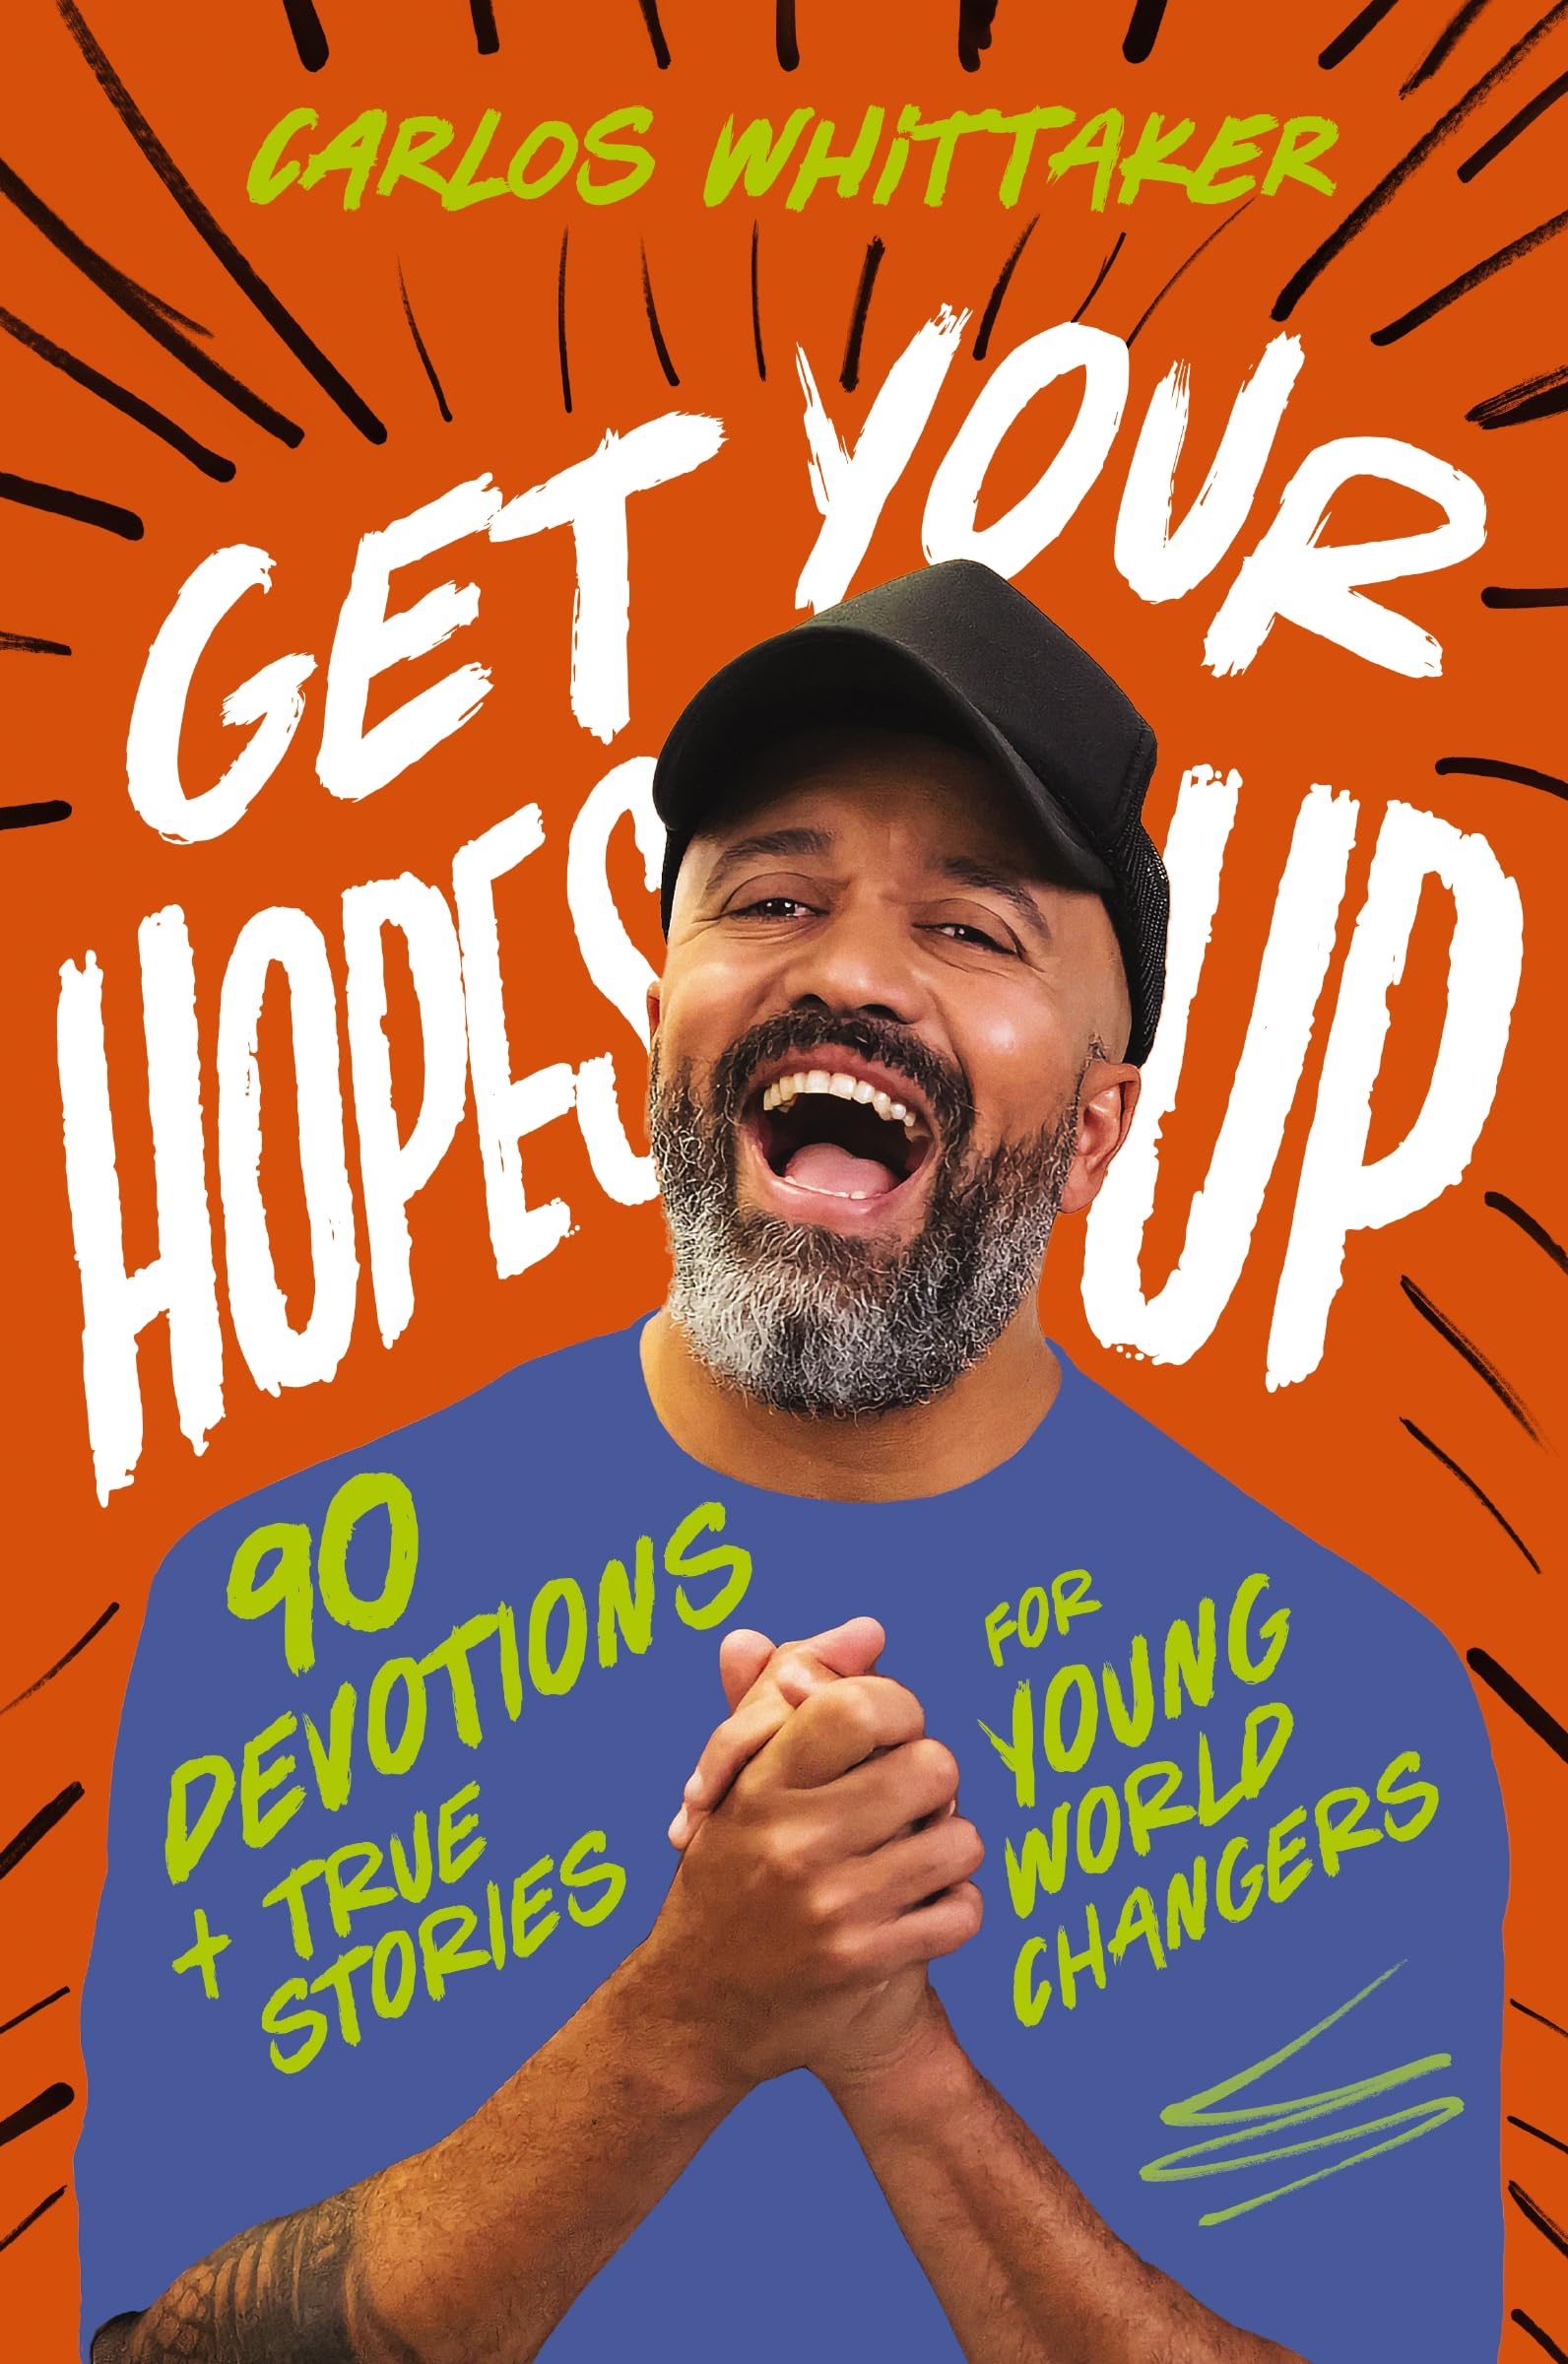 Get Your Hopes Up: 90 Devotions and True Stories for Young World Changers